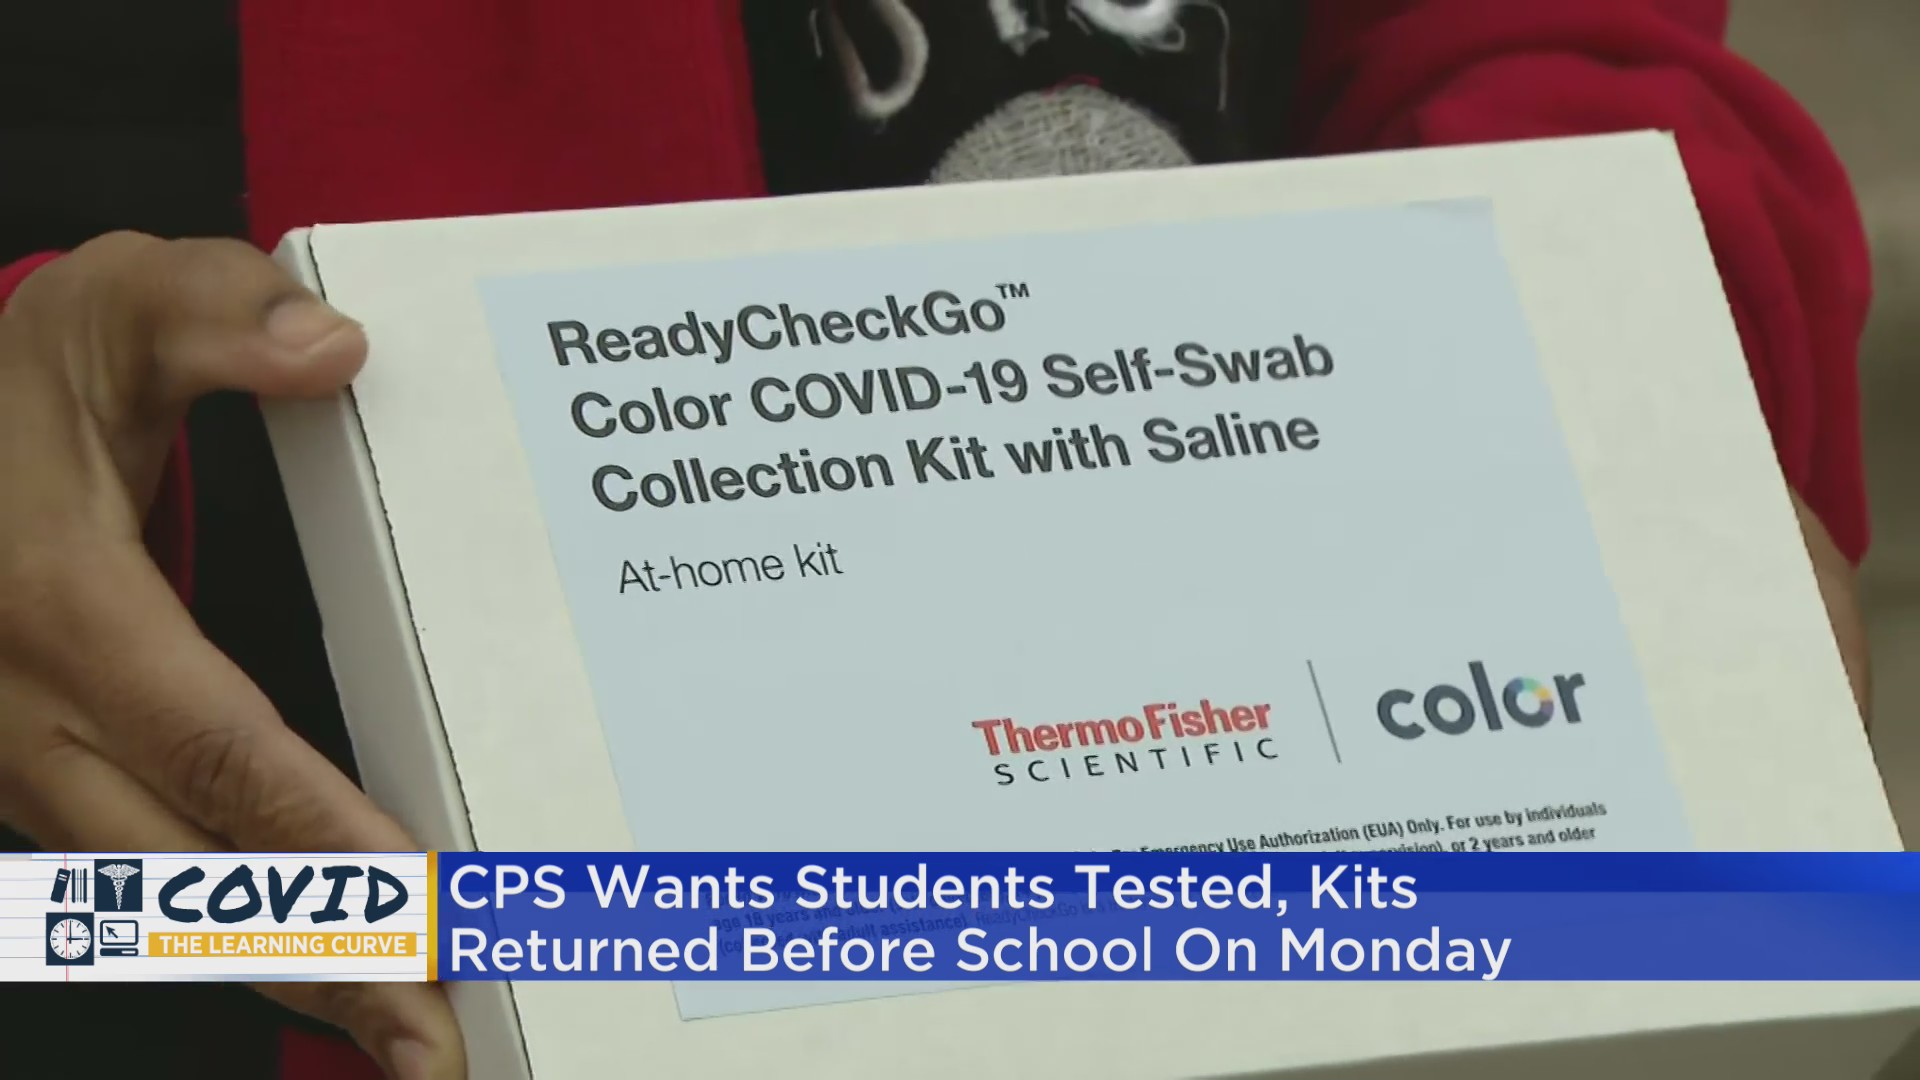 Chicago Teachers Union Accuses CPS Of Coming Up Short On COVID Testing During Winter Break